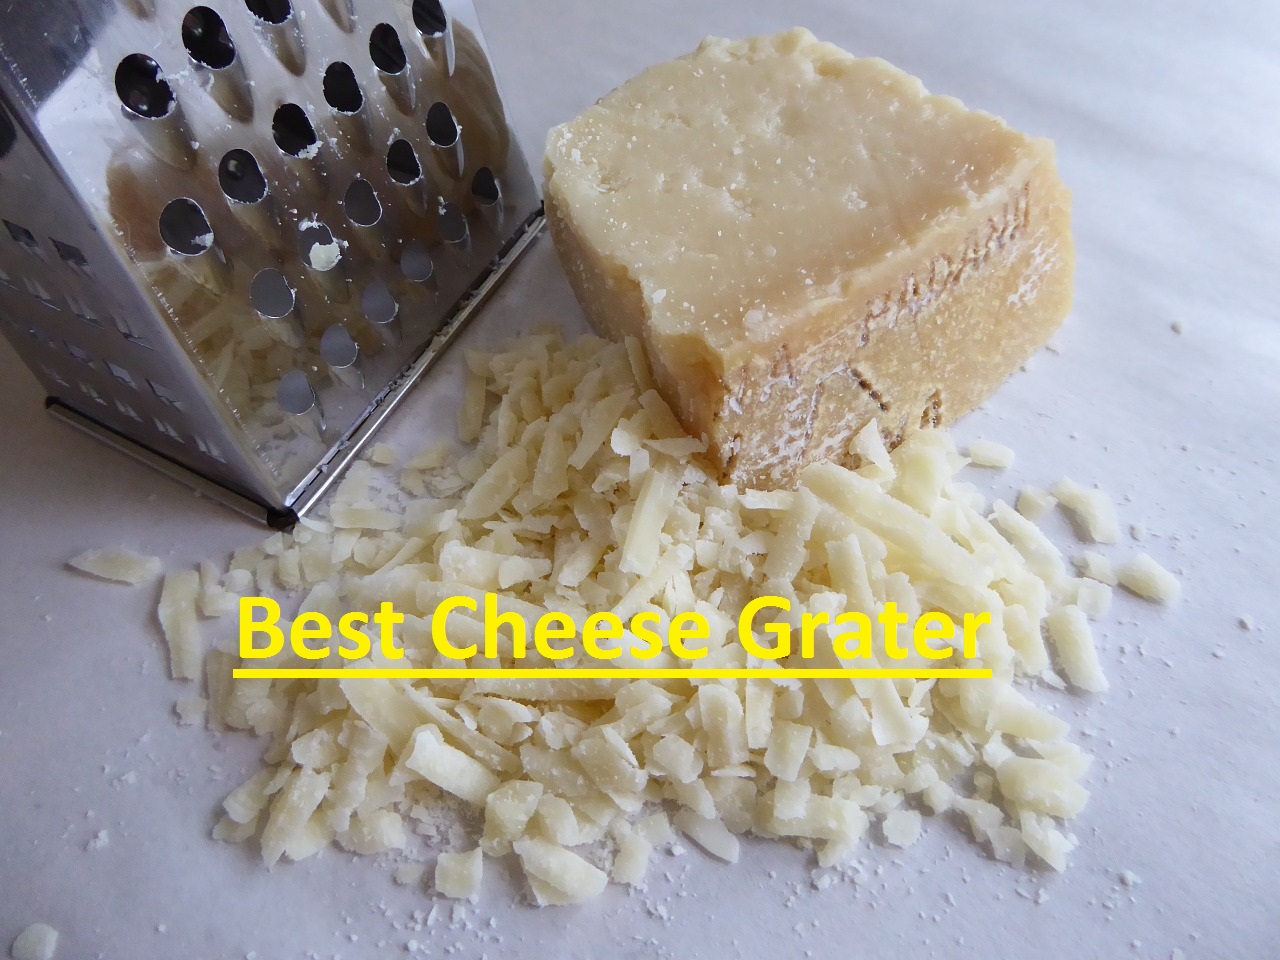 The 7 Best Cheese Grater Test Kitchen to Buy of 2023